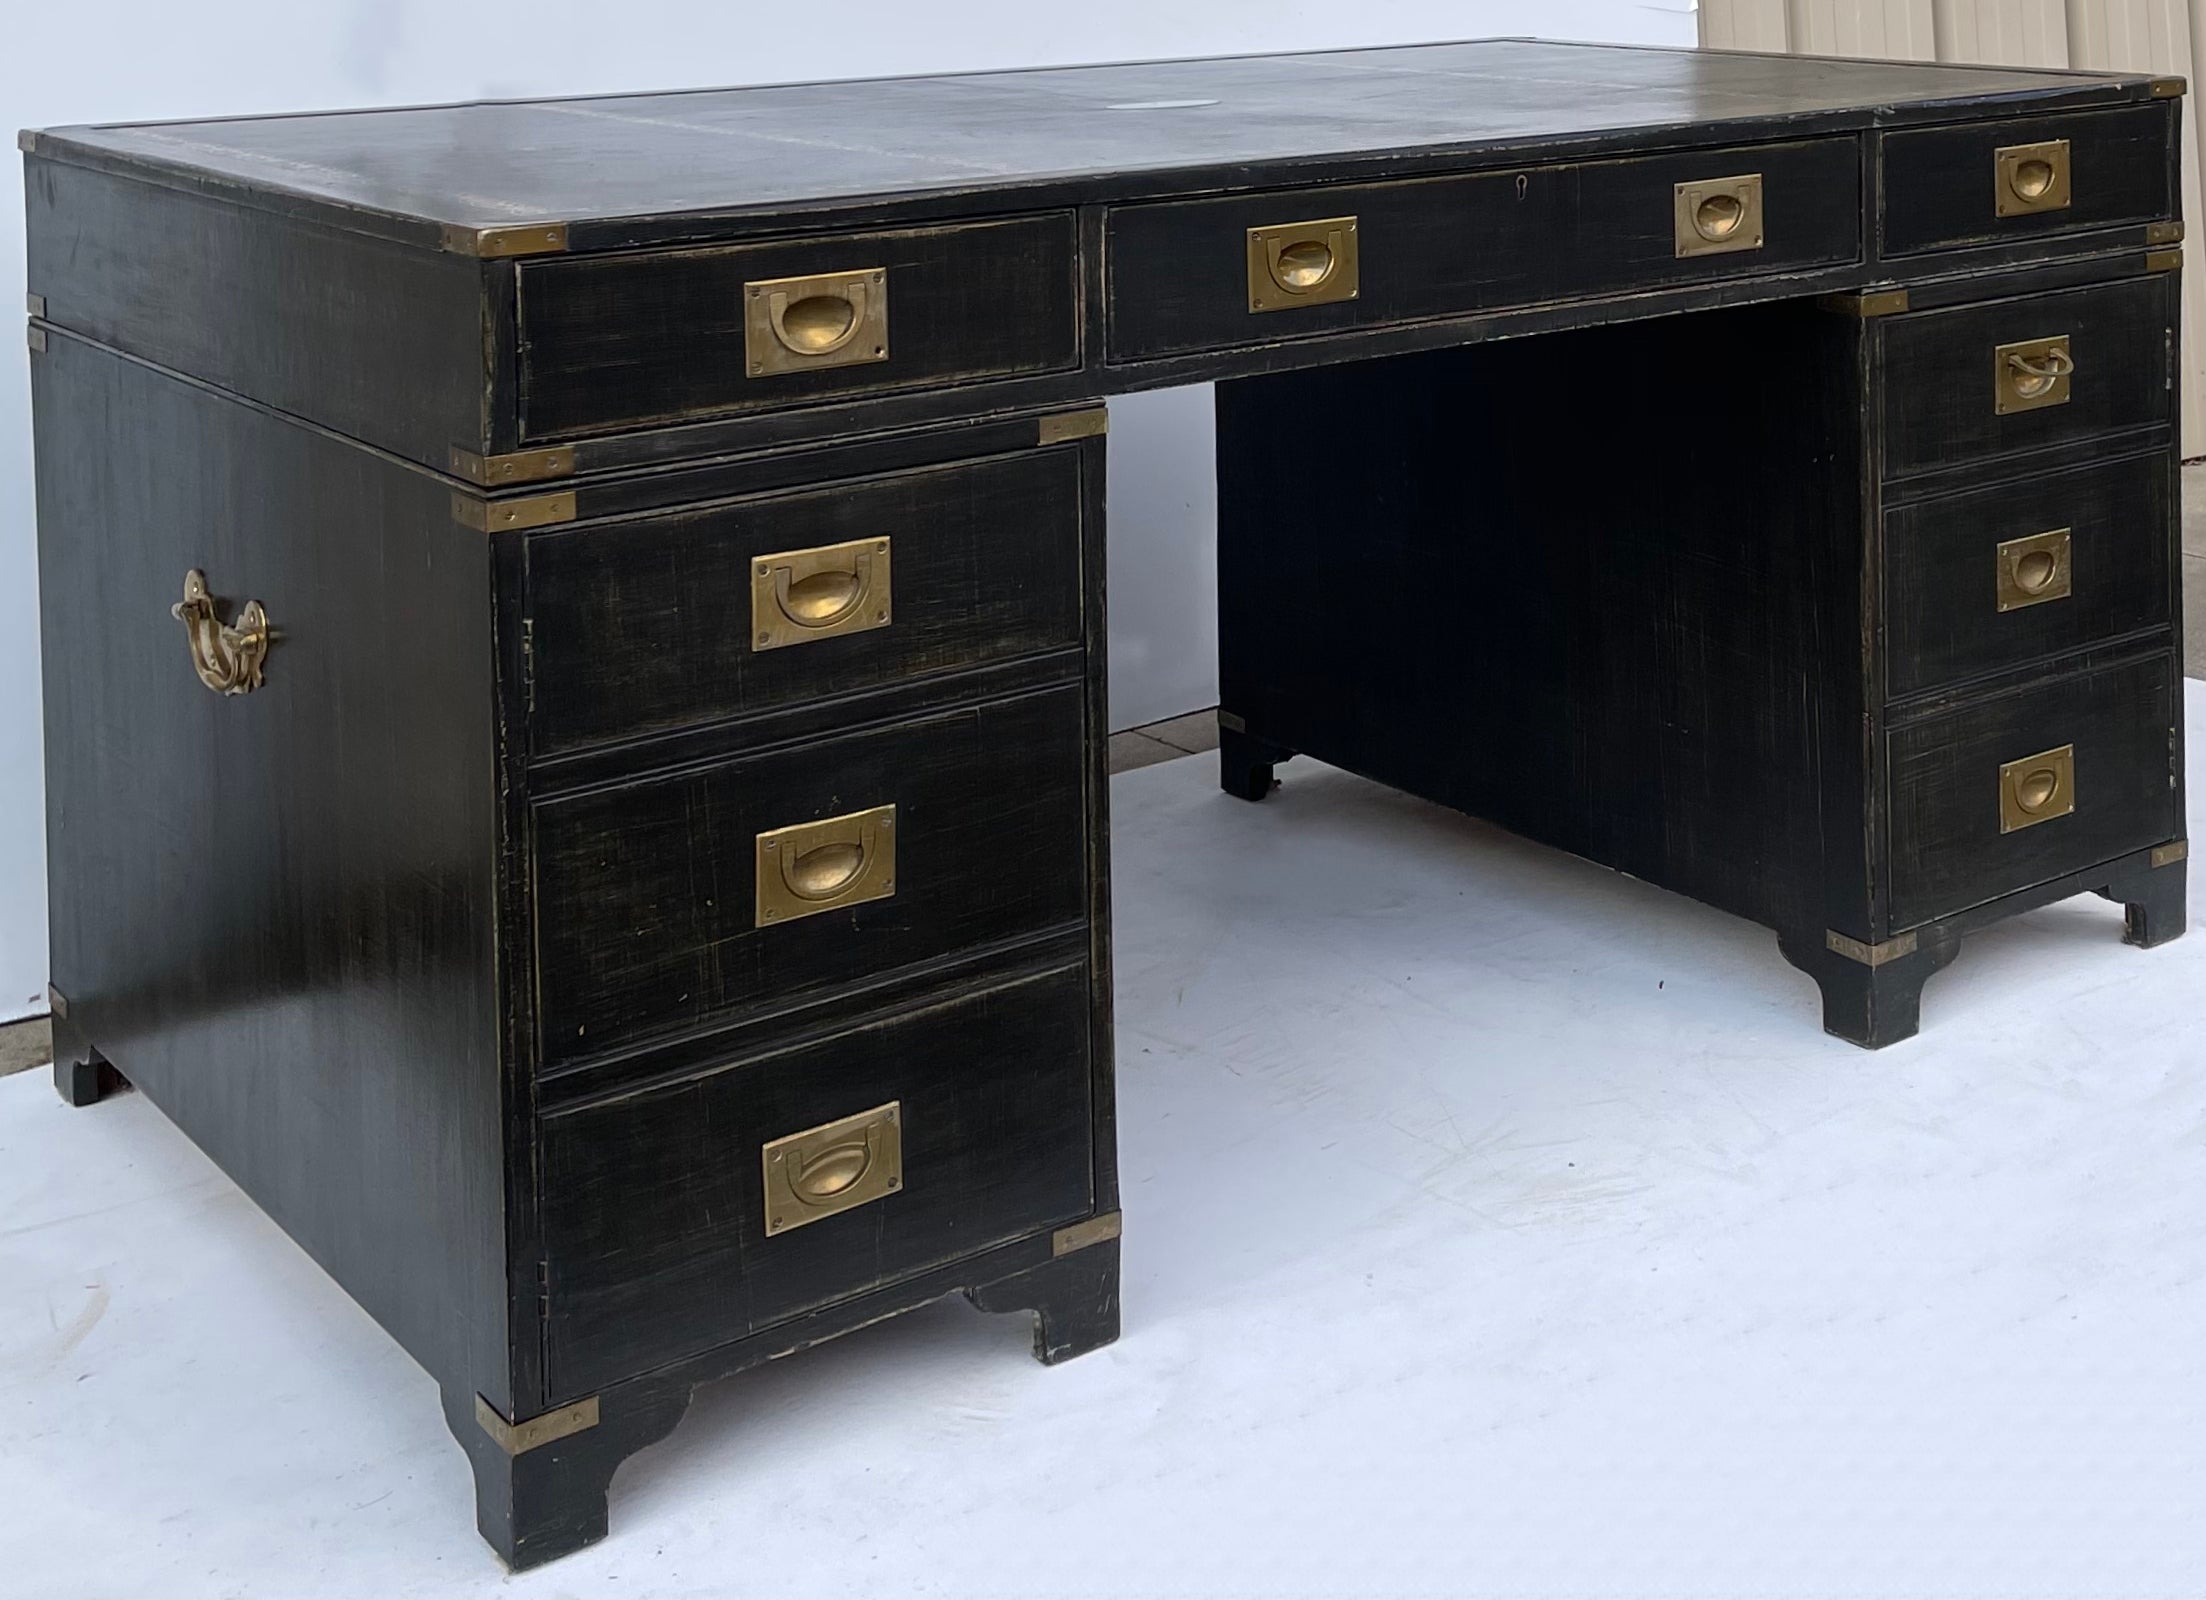 This is an English Bevan Funnell Ltd. campaign style partners desk. The top is a tooled green leather with light wear and brass plate. The finish is a custom aged and rubbed black. The piece includes cabinet style fronts, small drawers and one file